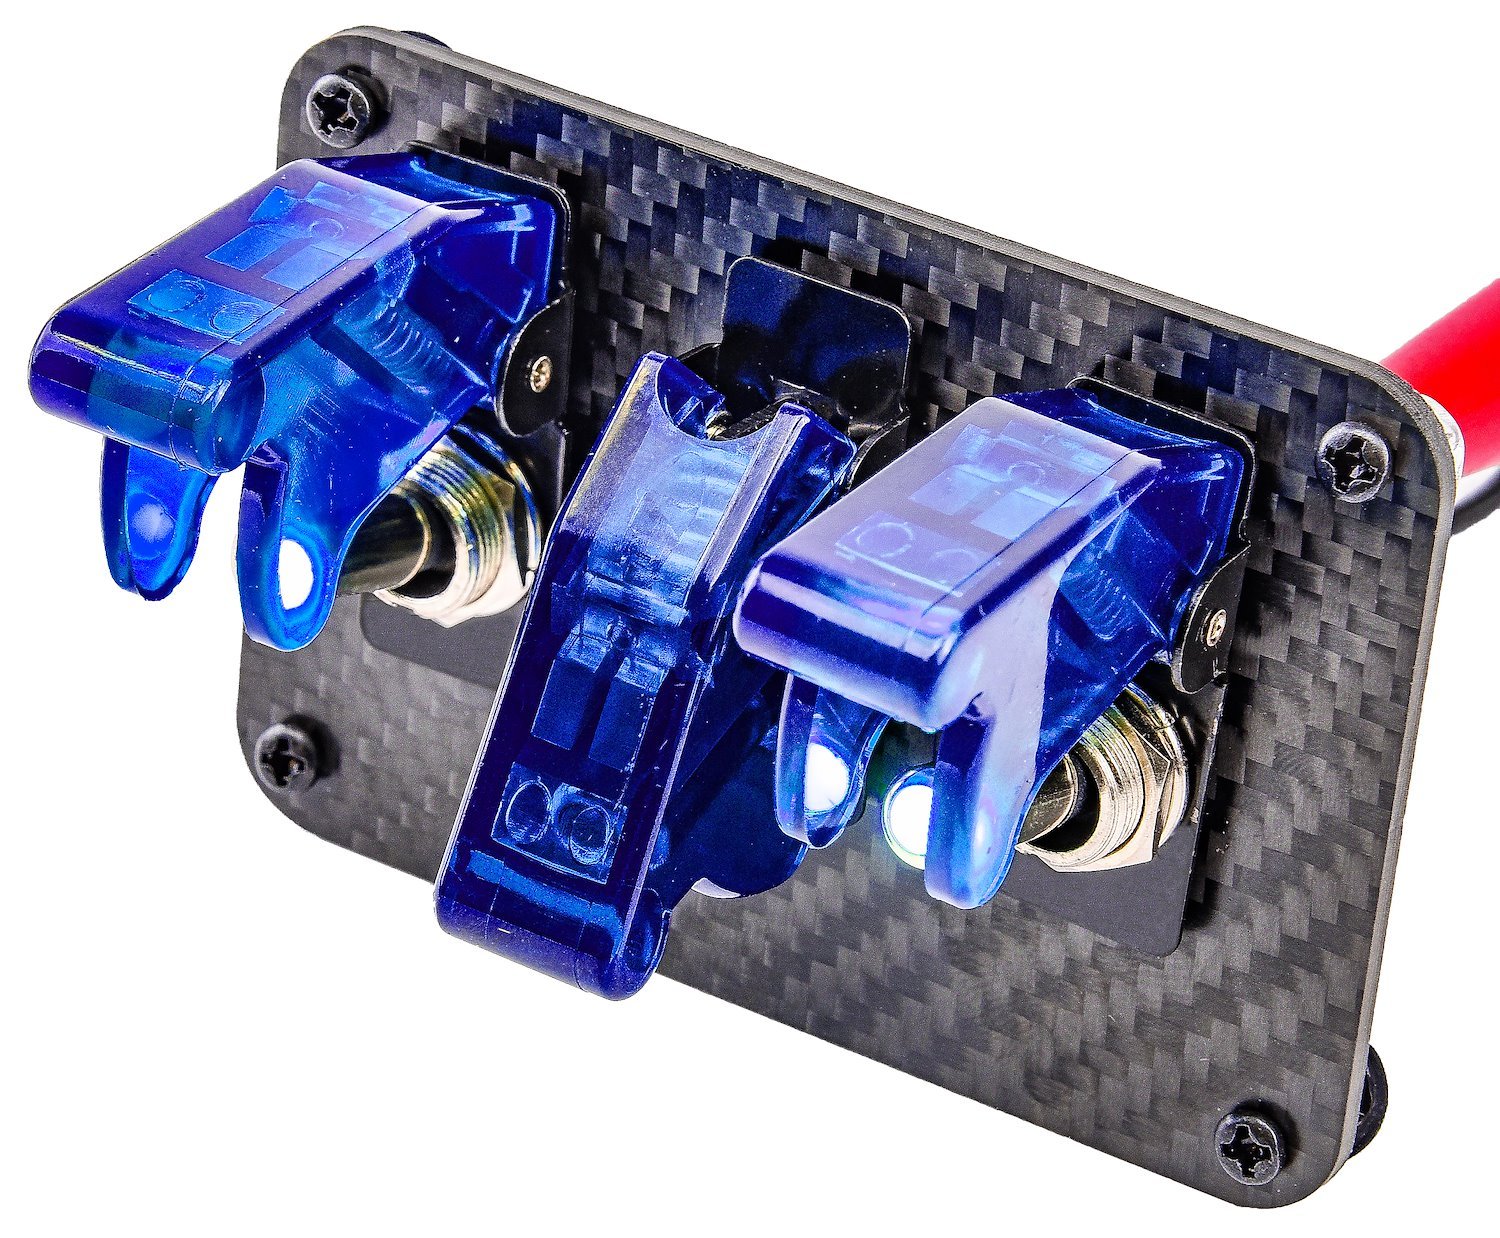 BILLET Blue Blue Anodized Plate w/ LED toggle switches